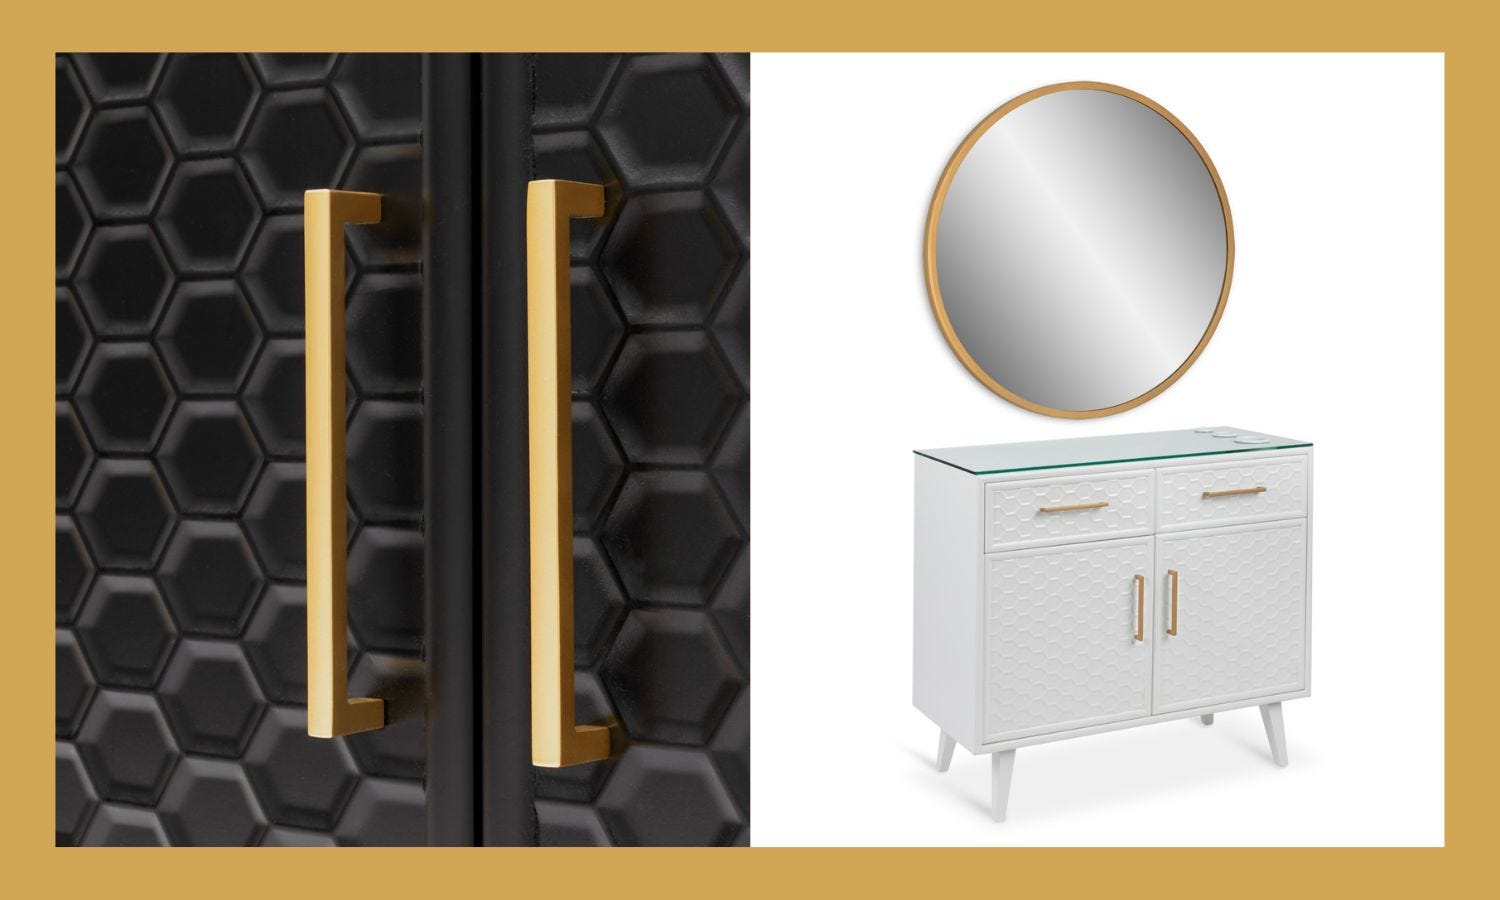 2-drawer white styling station with honeycomb texture, glass countertop and round mirror